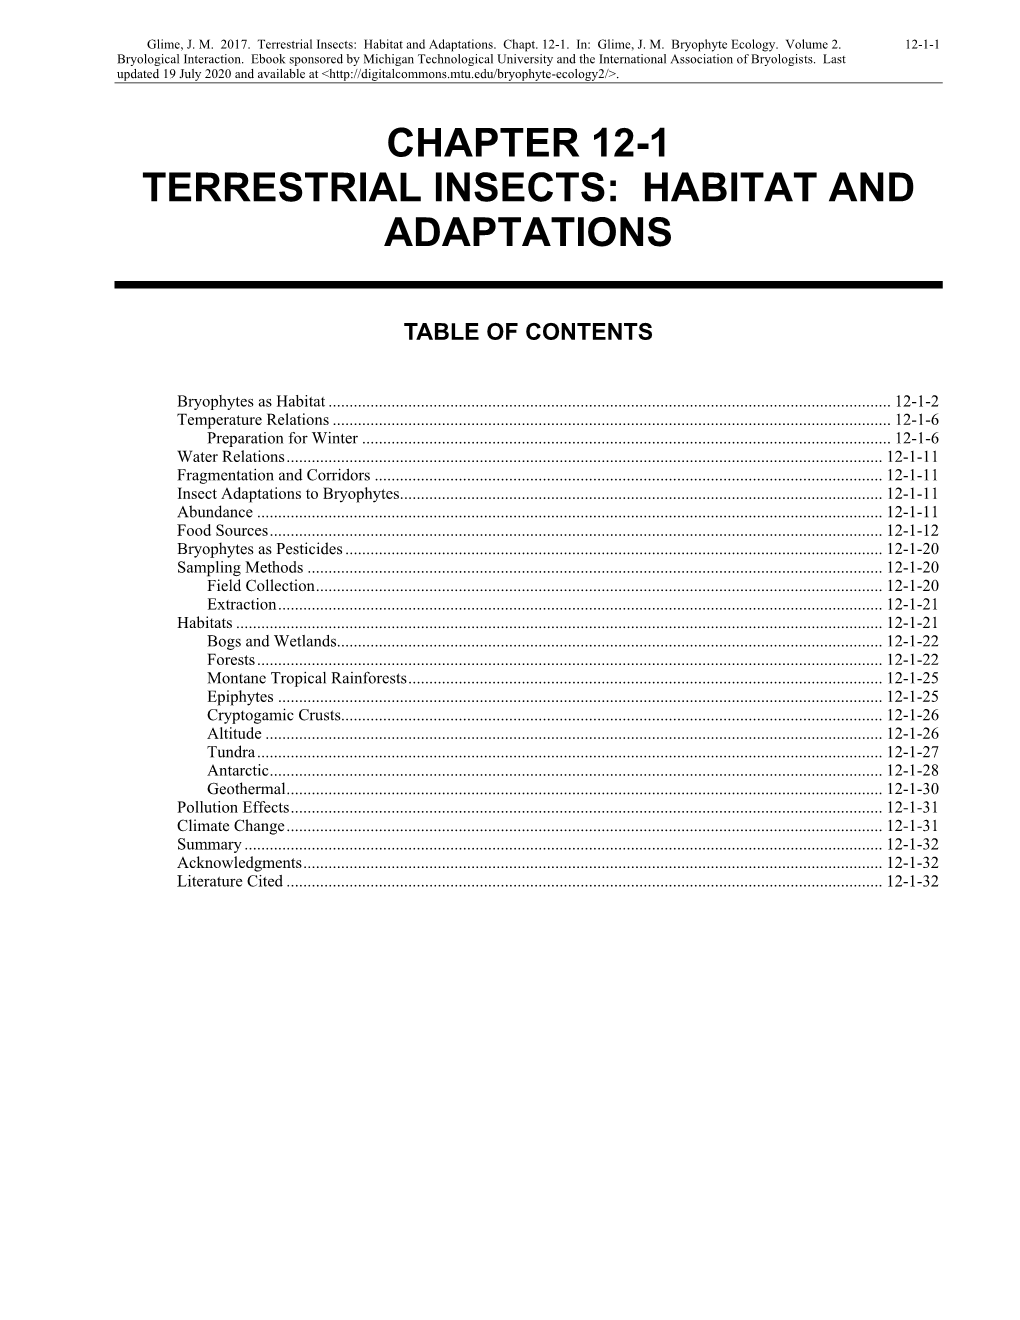 Terrestrial Insects: Habitat and Adaptations